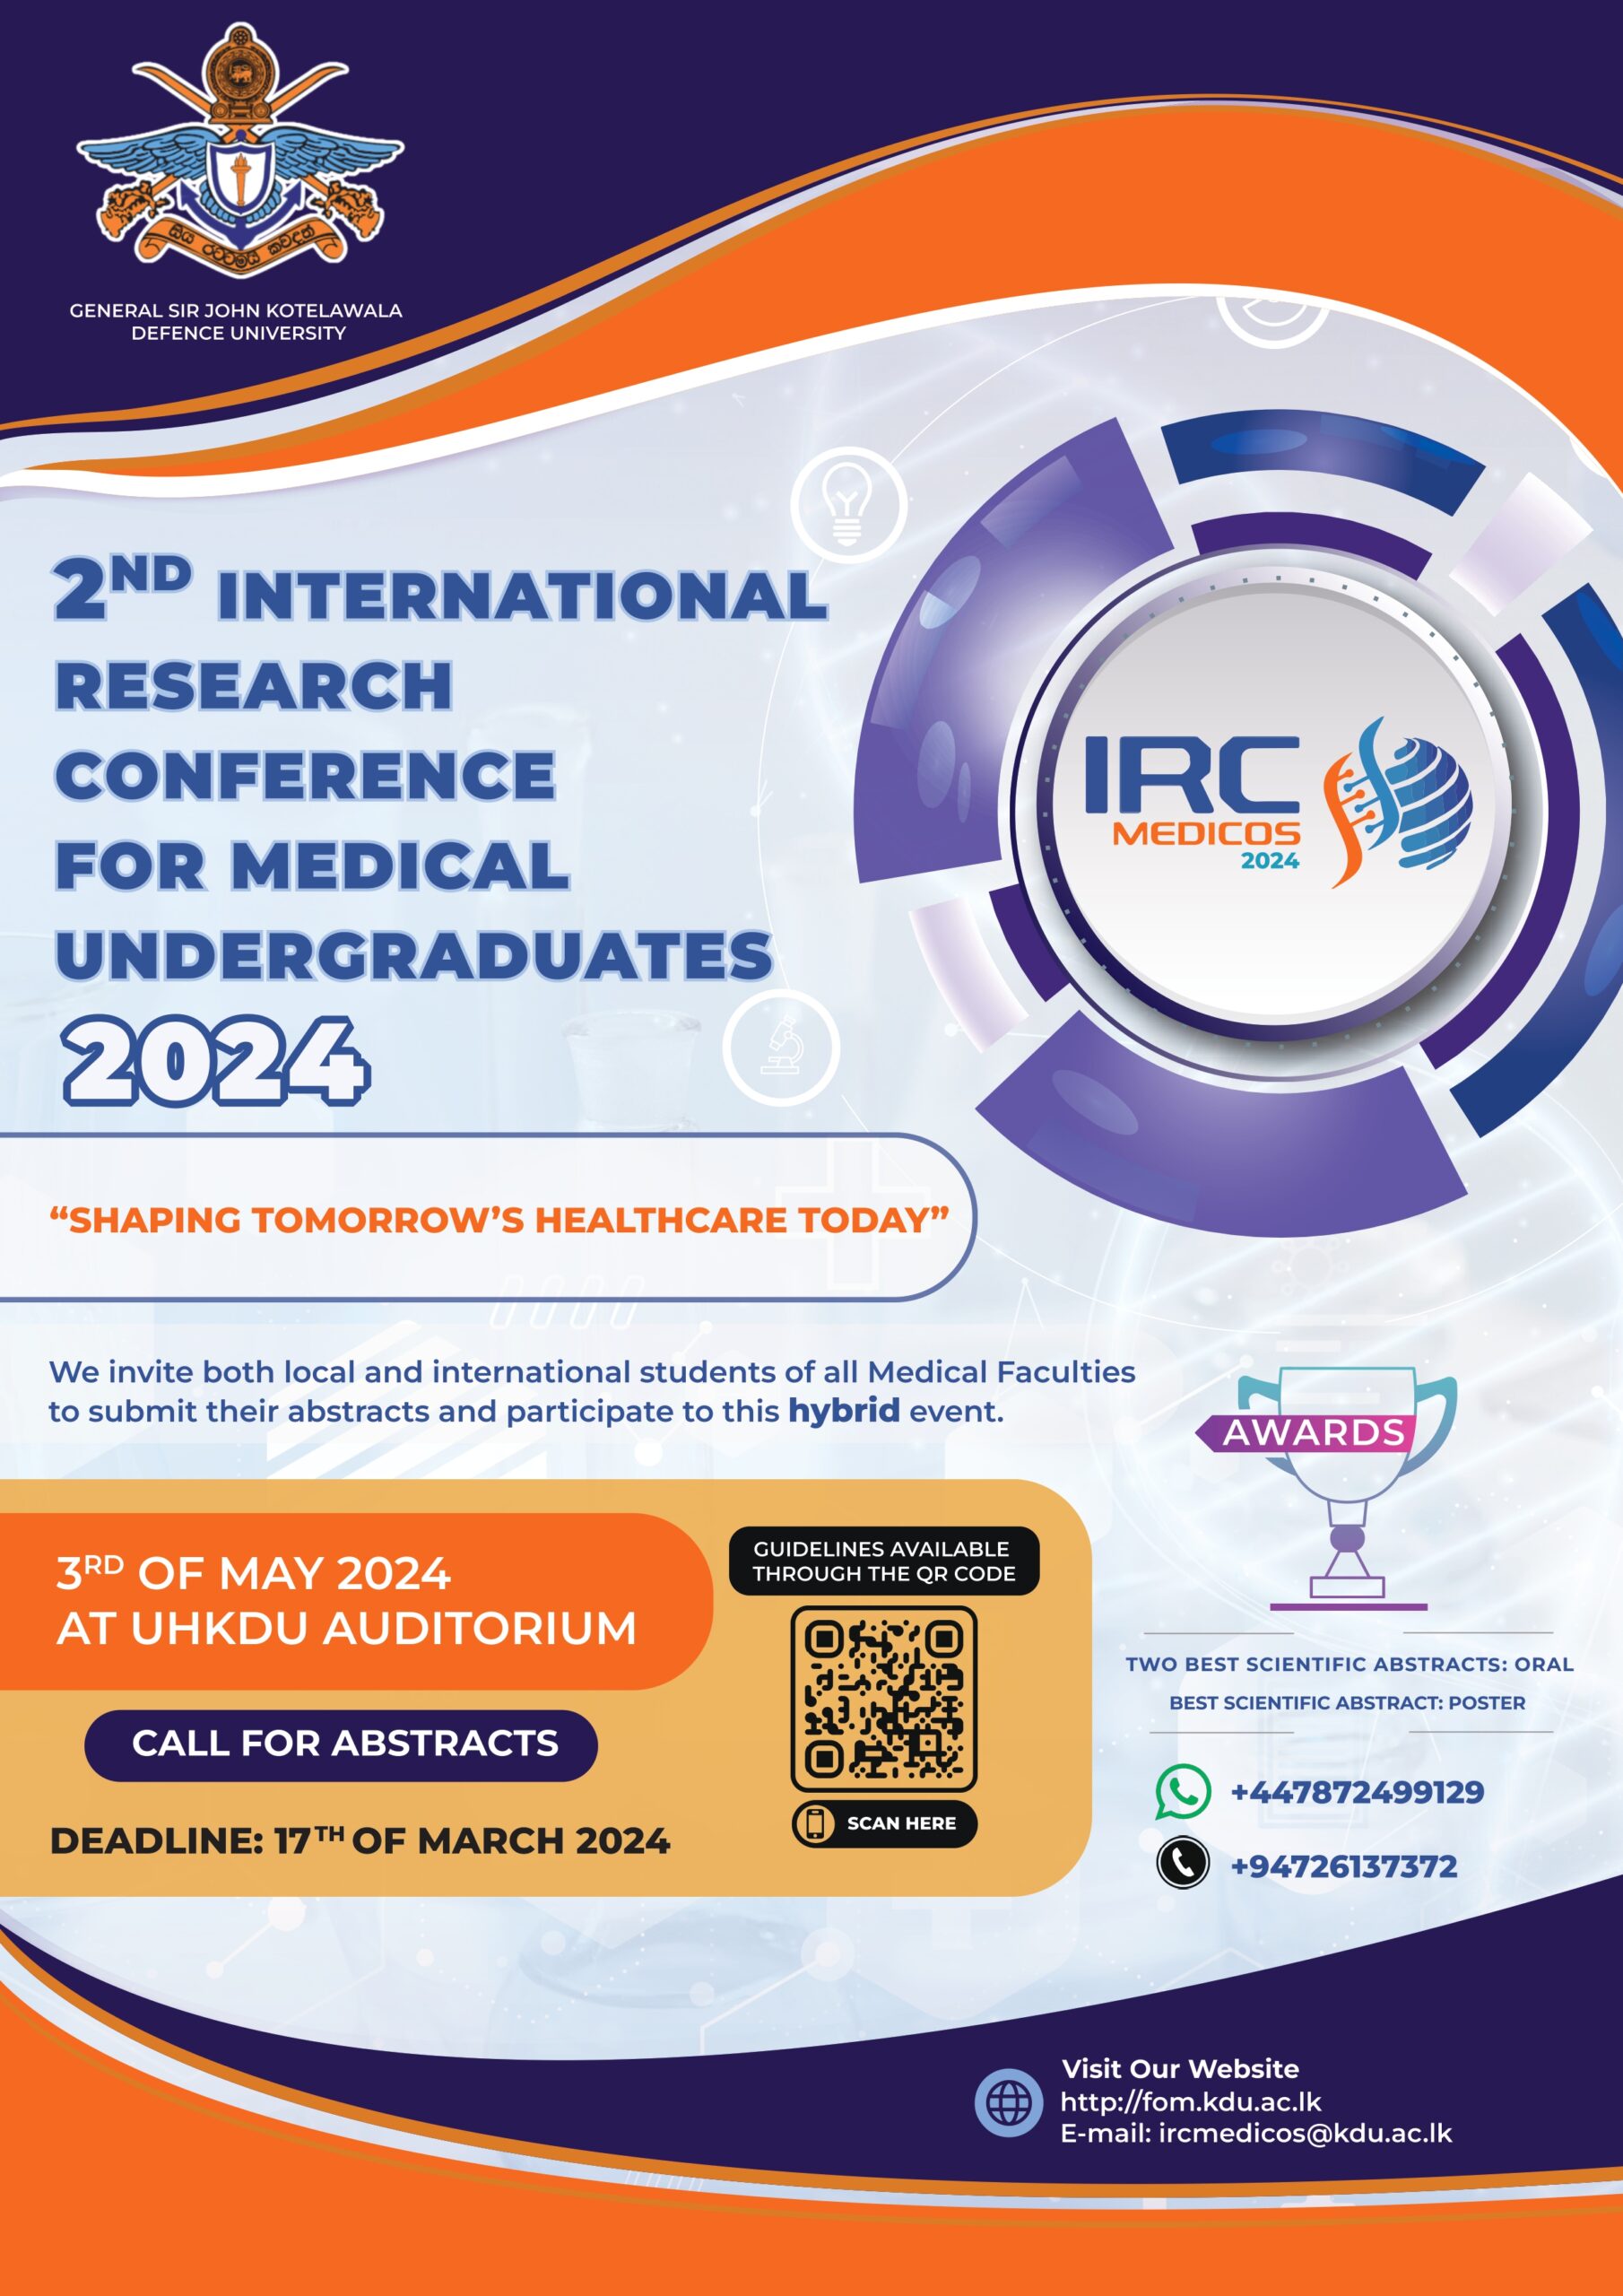 International Research Conference for Medical Undergraduates 2024